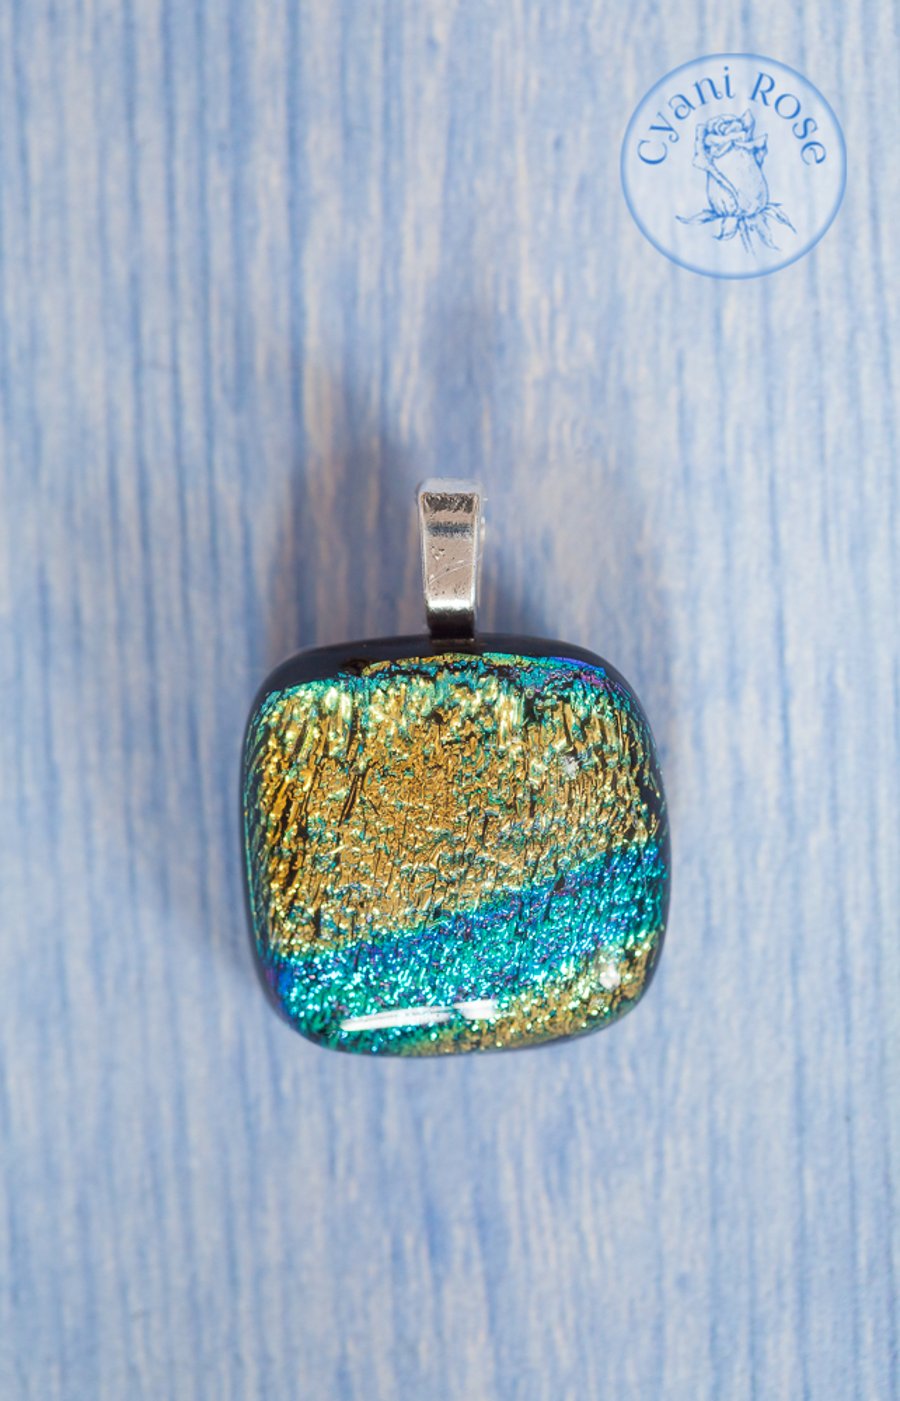 Pendant Necklace beautiful Dichroic fused glass pendent handmade